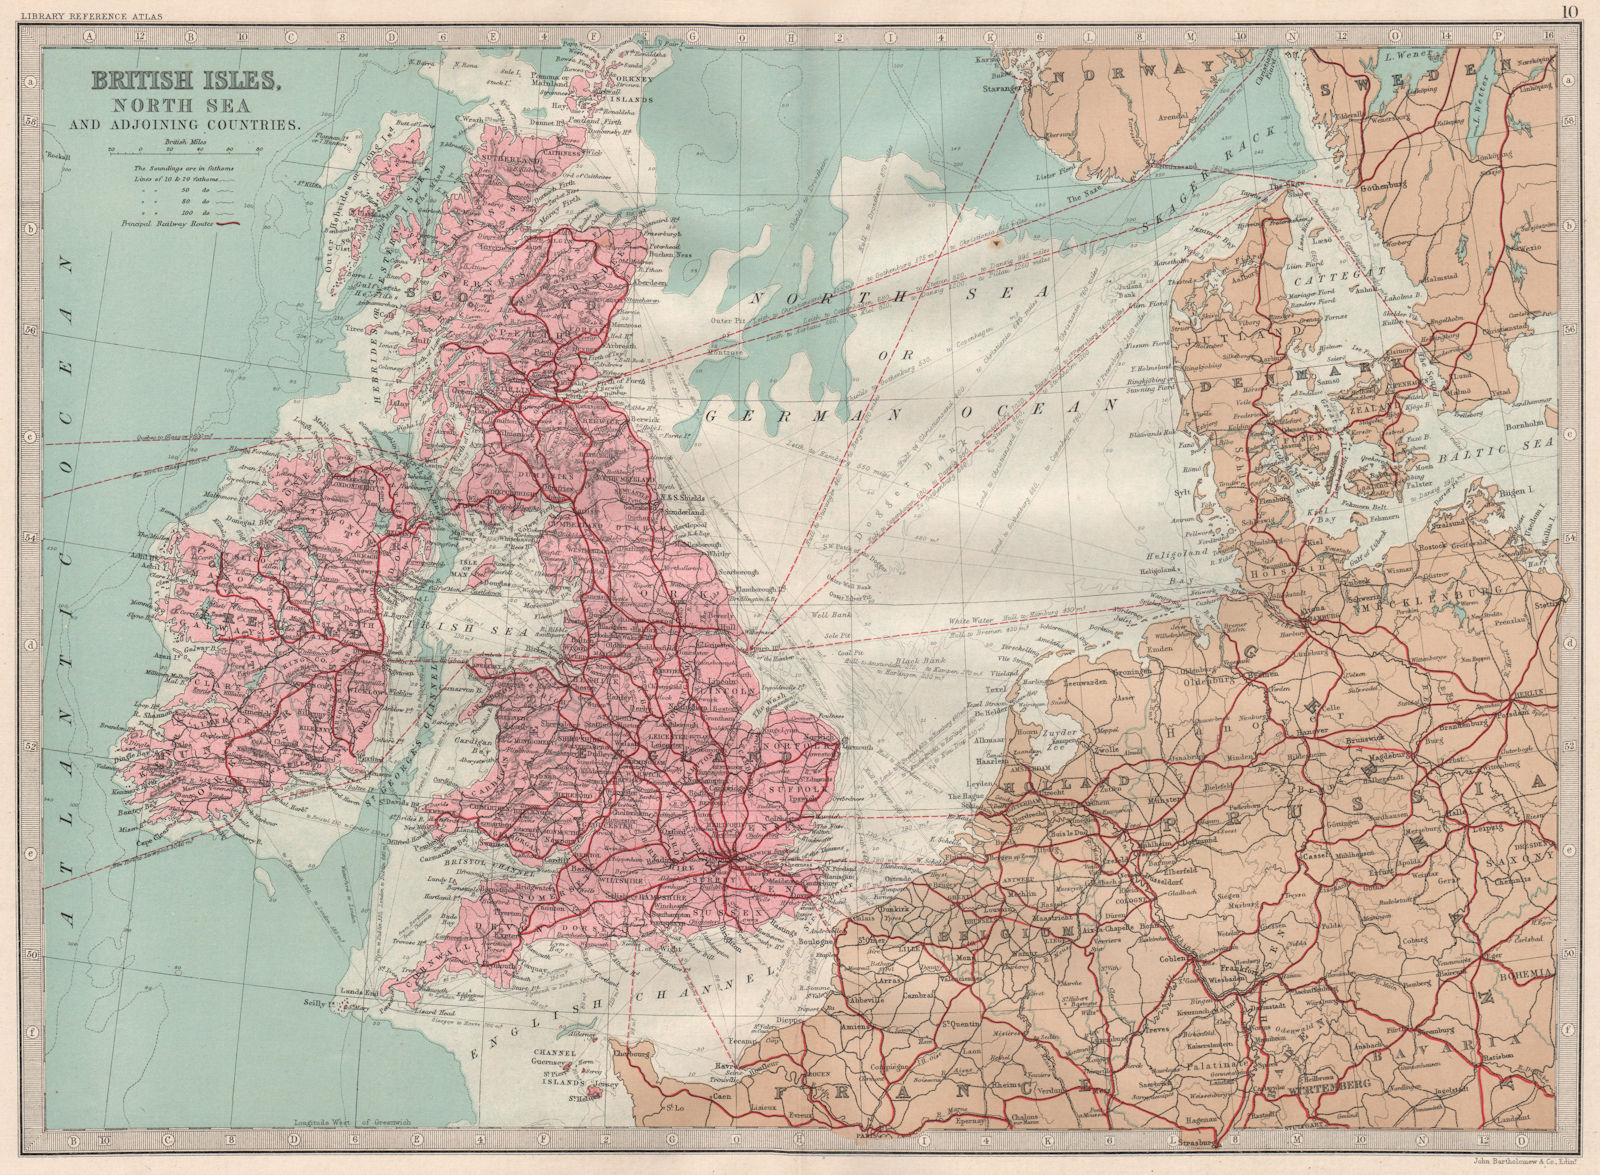 Associate Product NORTH WEST EUROPE. British Isles North Sea & Adjoining Countries 1890 old map